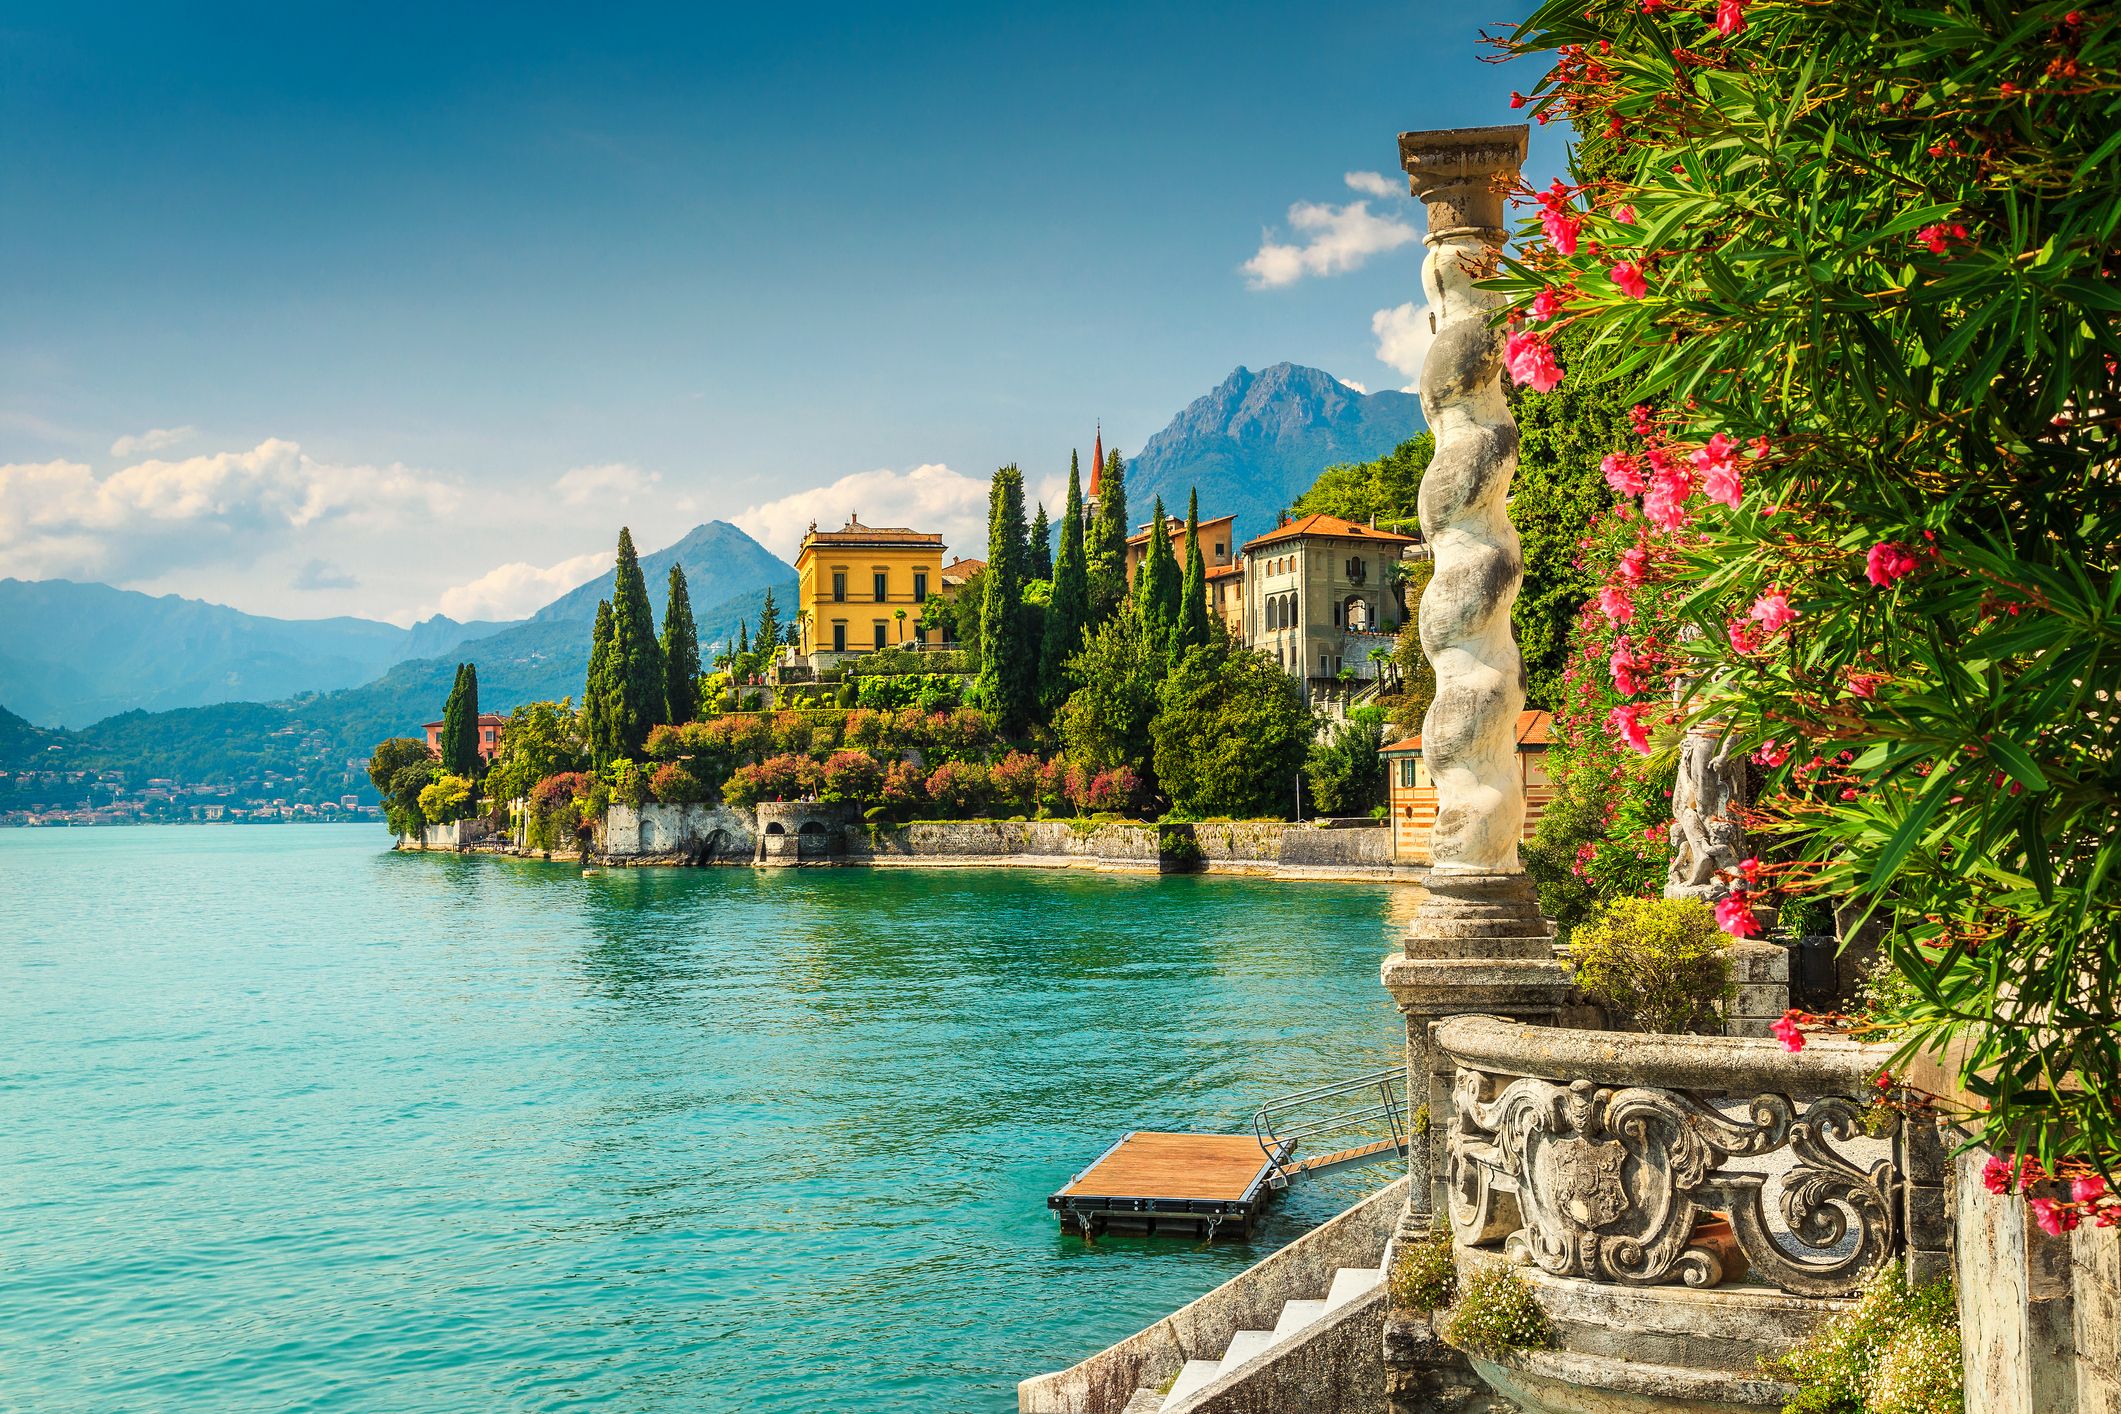 <p>There are gorgeous Italian gardens that surround <a href="https://www.goodhousekeeping.com/uk/lifestyle/travel/a39783024/italy-lakes-tour/">Italy’s northern lakes</a> – a region blessed with a mild climate and lots of sunshine. From fragrant citrus tunnels and aromatic pines to cascades of camellias, hydrangeas and roses, the exceptional beauty and variety of this are makes it a true nirvana for plant lovers.</p><p>Embracing <a href="https://www.goodhousekeepingholidays.com/tours/italian-lakes-switzerland">Orta</a>, <a href="https://www.goodhousekeeping.com/uk/lifestyle/travel/a46263952/lake-maggiore-holidays/">Maggiore</a>, Varese, <a href="https://www.goodhousekeeping.com/uk/lifestyle/travel/a46102357/lake-lugano/">Lugano</a>, Como, Iseo, Idro and <a href="https://www.goodhousekeeping.com/uk/lifestyle/travel/g40248459/lake-garda-hotels/">Garda</a>, the major Italian lakes extend across Piedmont, Lombardy, Veneto and Trentino-Alto Adige/Südtirol, with Maggiore and Lugano also reaching into <a href="https://www.goodhousekeeping.com/uk/lifestyle/travel/a42306034/switzerland-scenic-train-journeys/">Switzerland</a>. Every one of these majestic lakes offers its own unique allure, but lush plant life is a thrilling feature of each.</p><p>Some of these Italian gardens can be glimpsed only from boat trips on the various lakes, which serves to make them even more romantic and alluring. But many lakes gardens are open to visitors (some only in the warmer months), and each offers something different and unique to inspire the green-fingered. You might recognise some from famous films, though each scene offers a sense of cinematic, photogenic glamour and is full of vibrant, colourful life.</p><p>As well as being home to lush Italian gardens, the Lakes provide a fabulous outdoor playground for hikers, swimmers, water-skiers, windsurfers, sailors, canoeists, cyclists and mountain-bikers, horse-riders and treetop adventurers. A hire car is the best way to make the most of them.</p><p>We’ve rounded up our favourite Italian gardens around the lakes, whether your taste runs to the formal or something more laidback and whimsical. You'll also find some wonderful garden tours to explore the Italian gardens on holiday.</p>